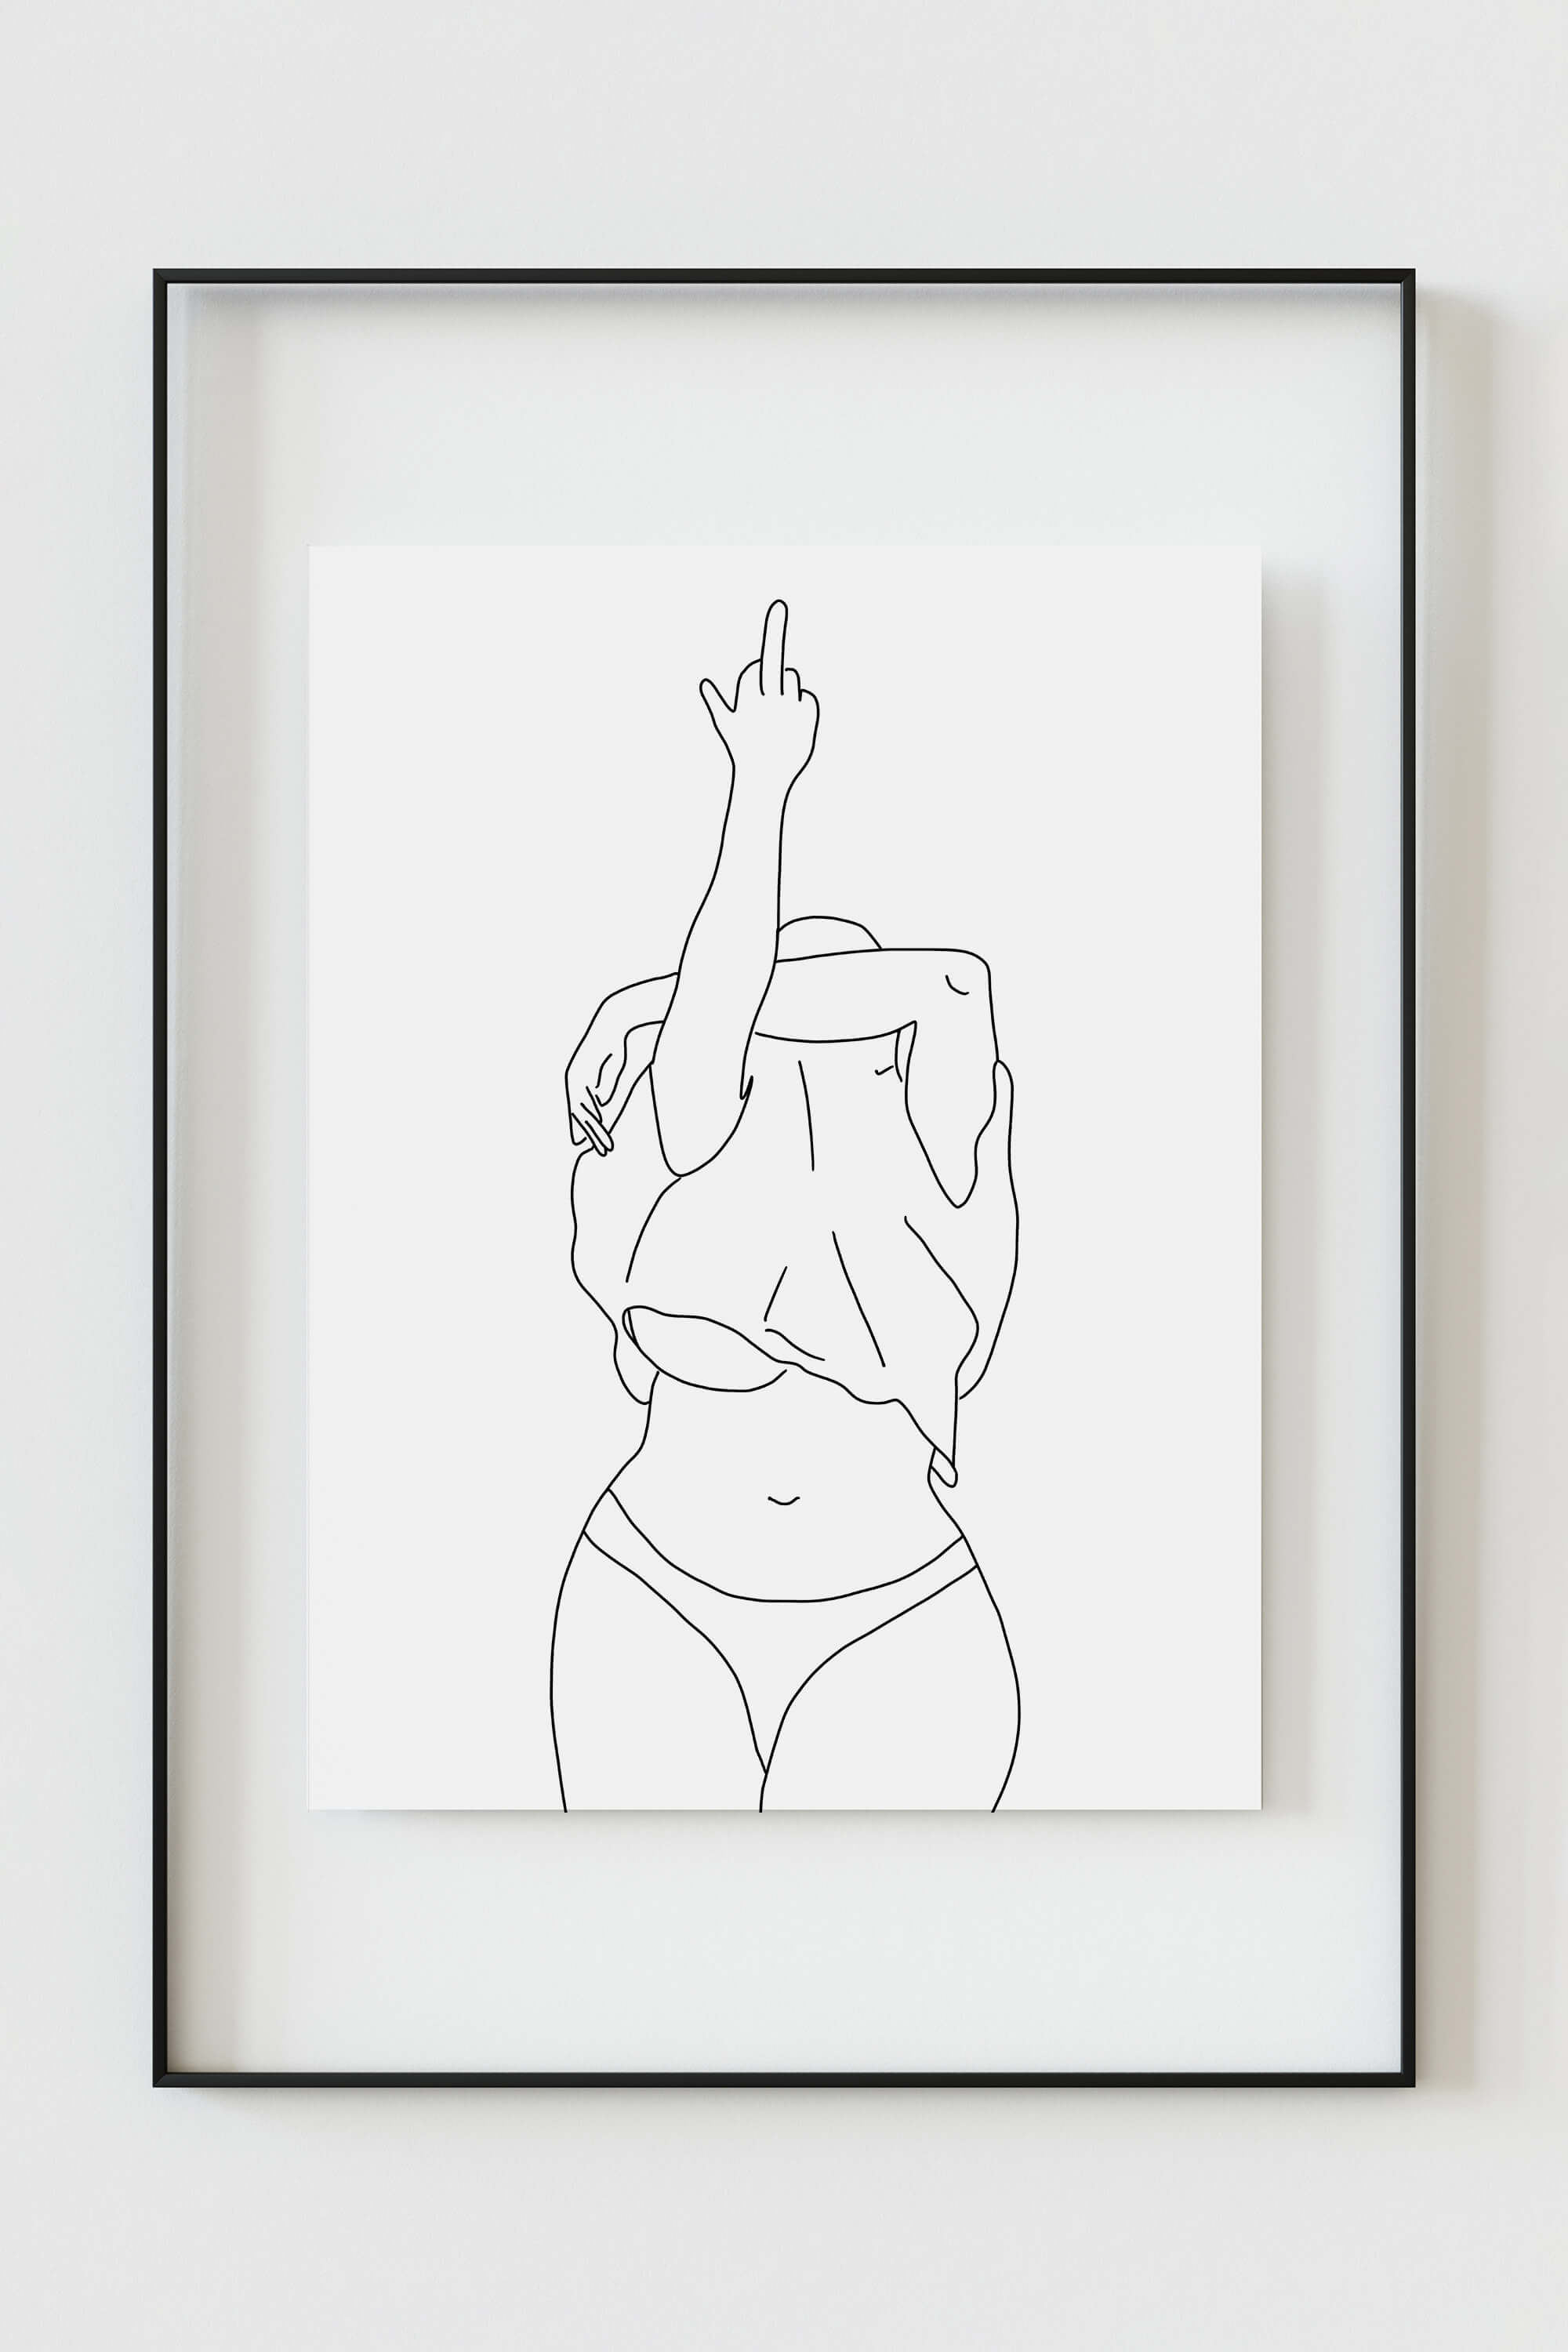 Artistic representation celebrating femininity through intricate lines and delicate details. Feminist art that embraces diversity and self-love. A manifesto in plus-size line art.